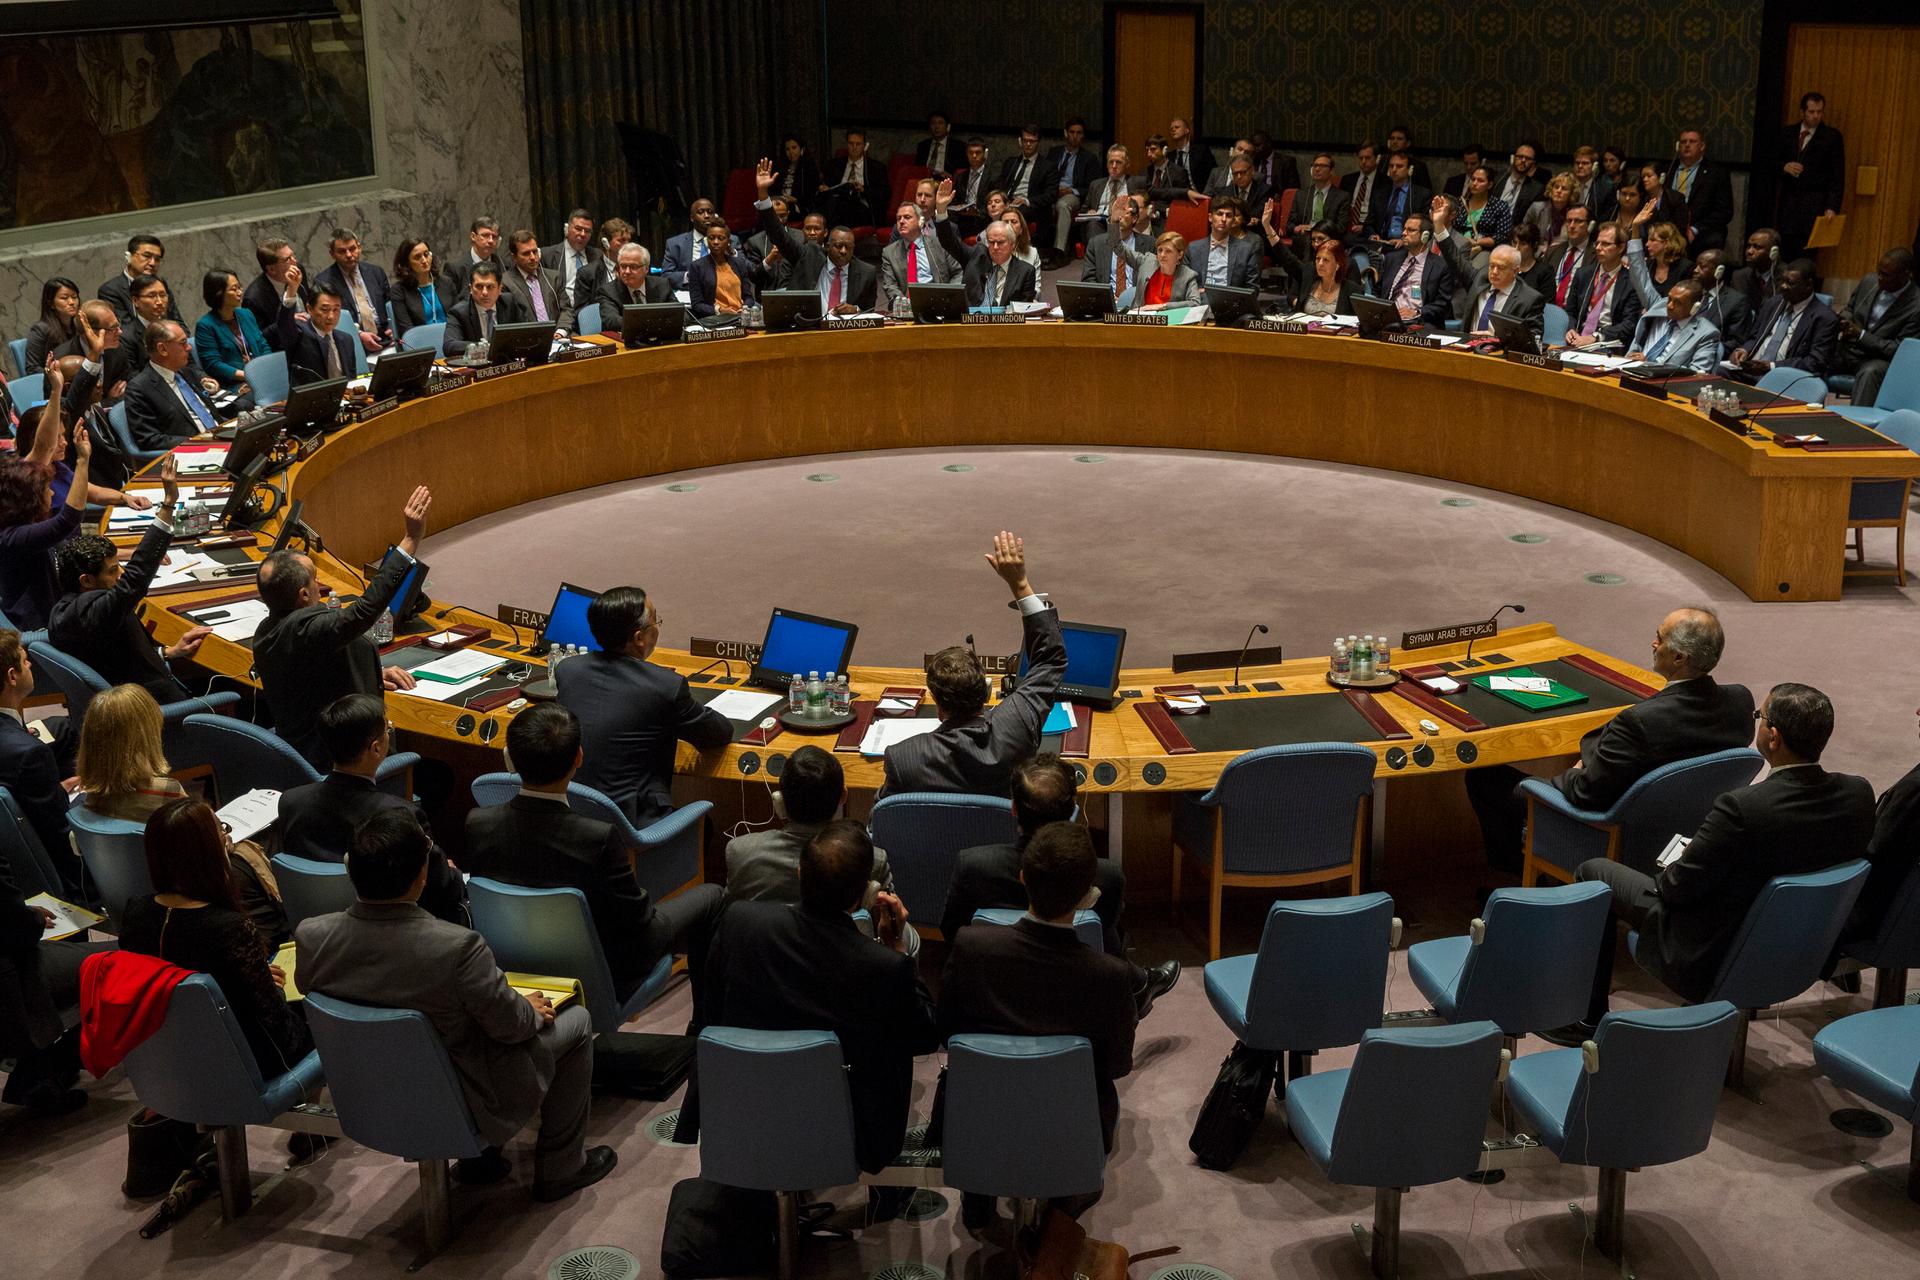 All members with the exception of Russia's UN Ambassador Vitaly Churkin and China's deputy U.N. Ambassador Wang Min vote in the United Nations Security Council in favor of referring the Syrian crisis to the International Criminal Court for investigation o